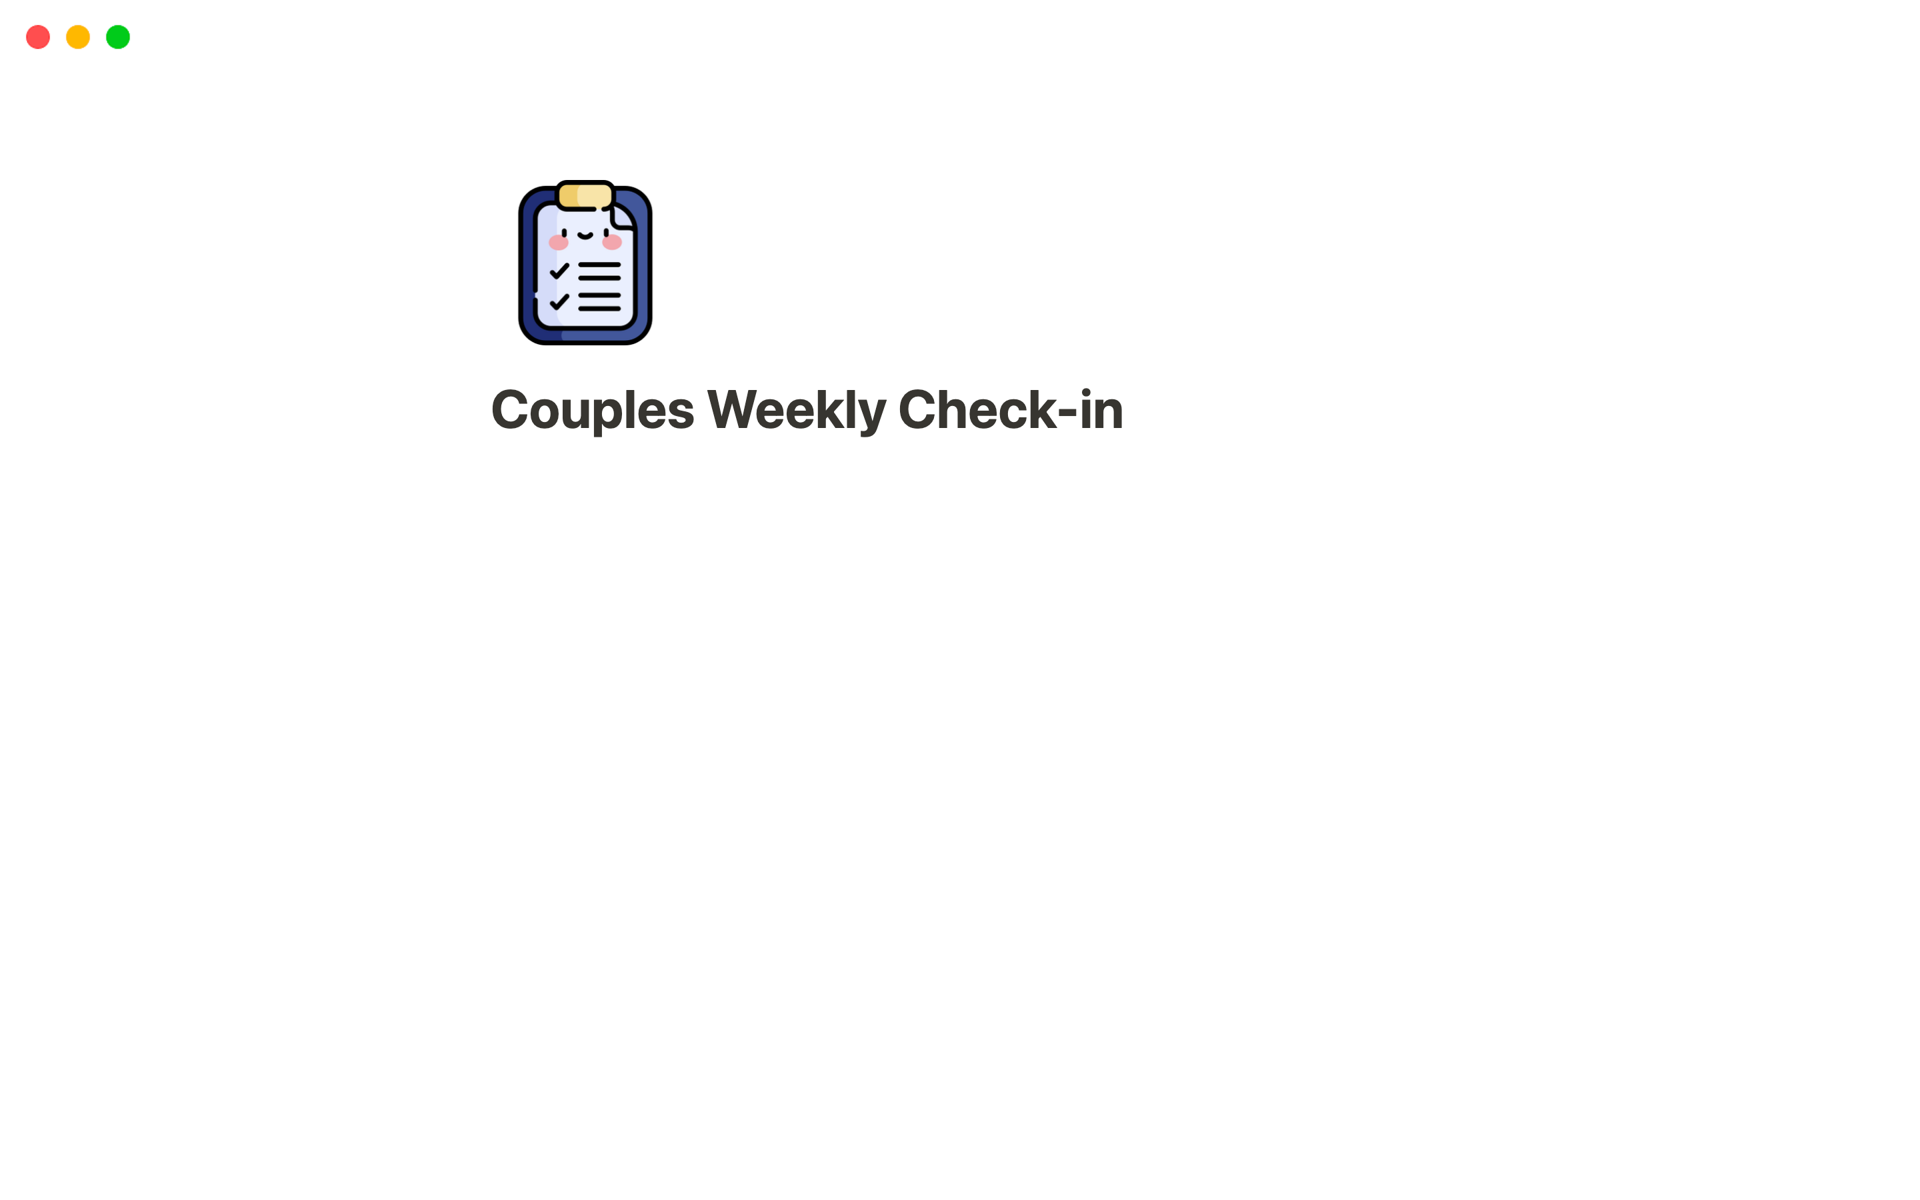 💑 Couples Weekly Check-In: Love & Connection Edition 💖

Embark on a journey of connection and understanding with our Couples Weekly Check-In card, designed to foster open communication and deepen your bond.